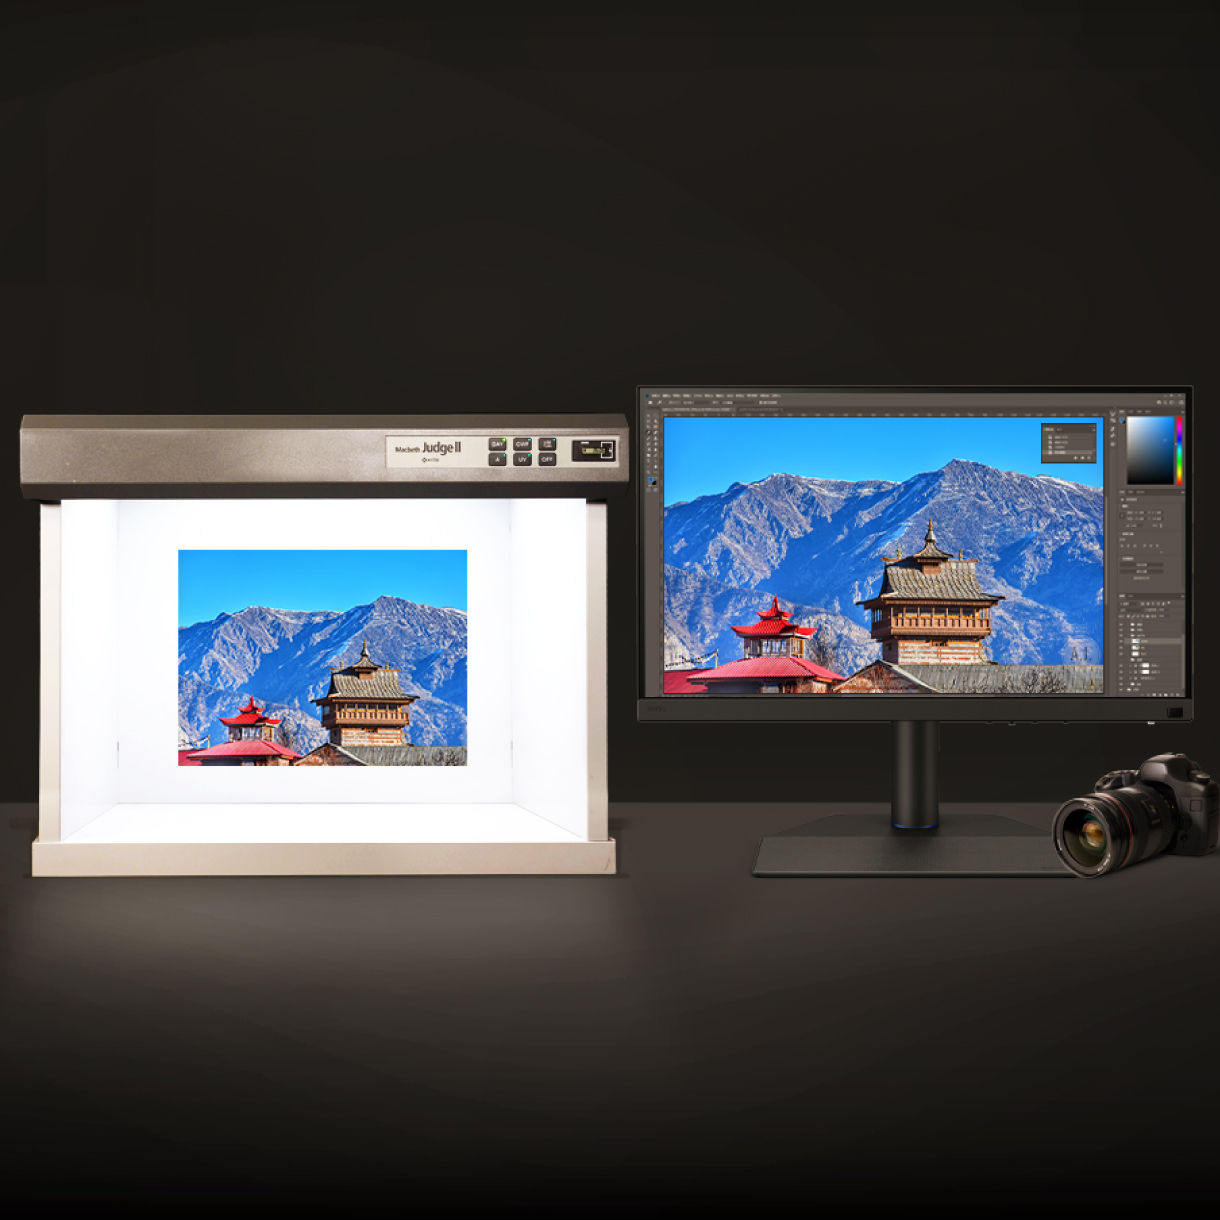 BenQ SW272Q offers the finest creative experiences with color consistency to simulate paper texture on-screen, and Paper Color Sync for accurate printed output, BenQ achieved unparalleled color performance beyond the industry standard.